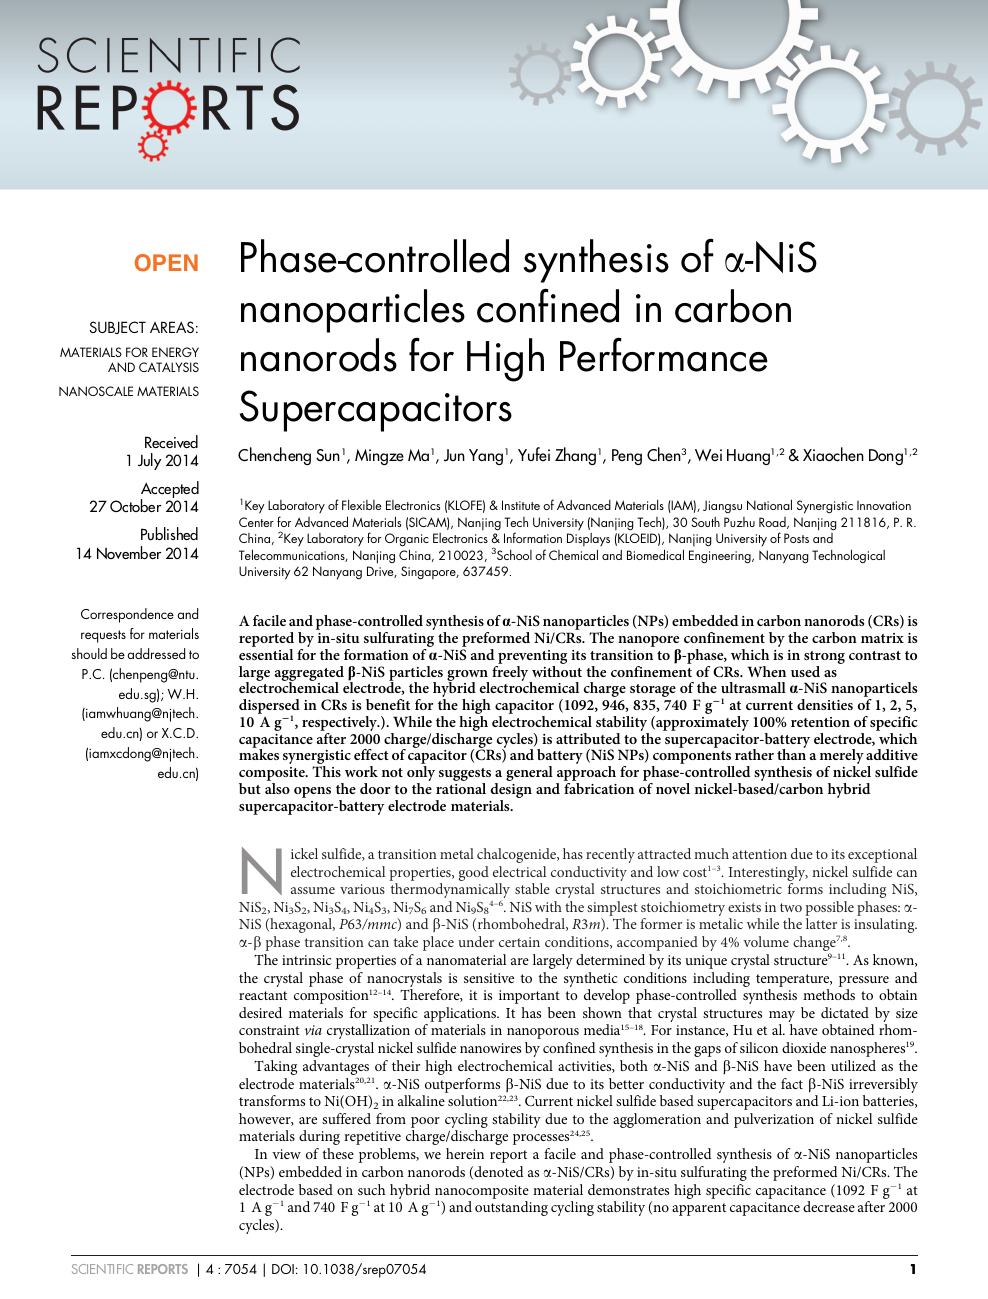 Phase Controlled Synthesis Of A Nis Nanoparticles Confined In Carbon Nanorods For High Performance Supercapacitors Topic Of Research Paper In Nano Technology Download Scholarly Article Pdf And Read For Free On Cyberleninka Open Science